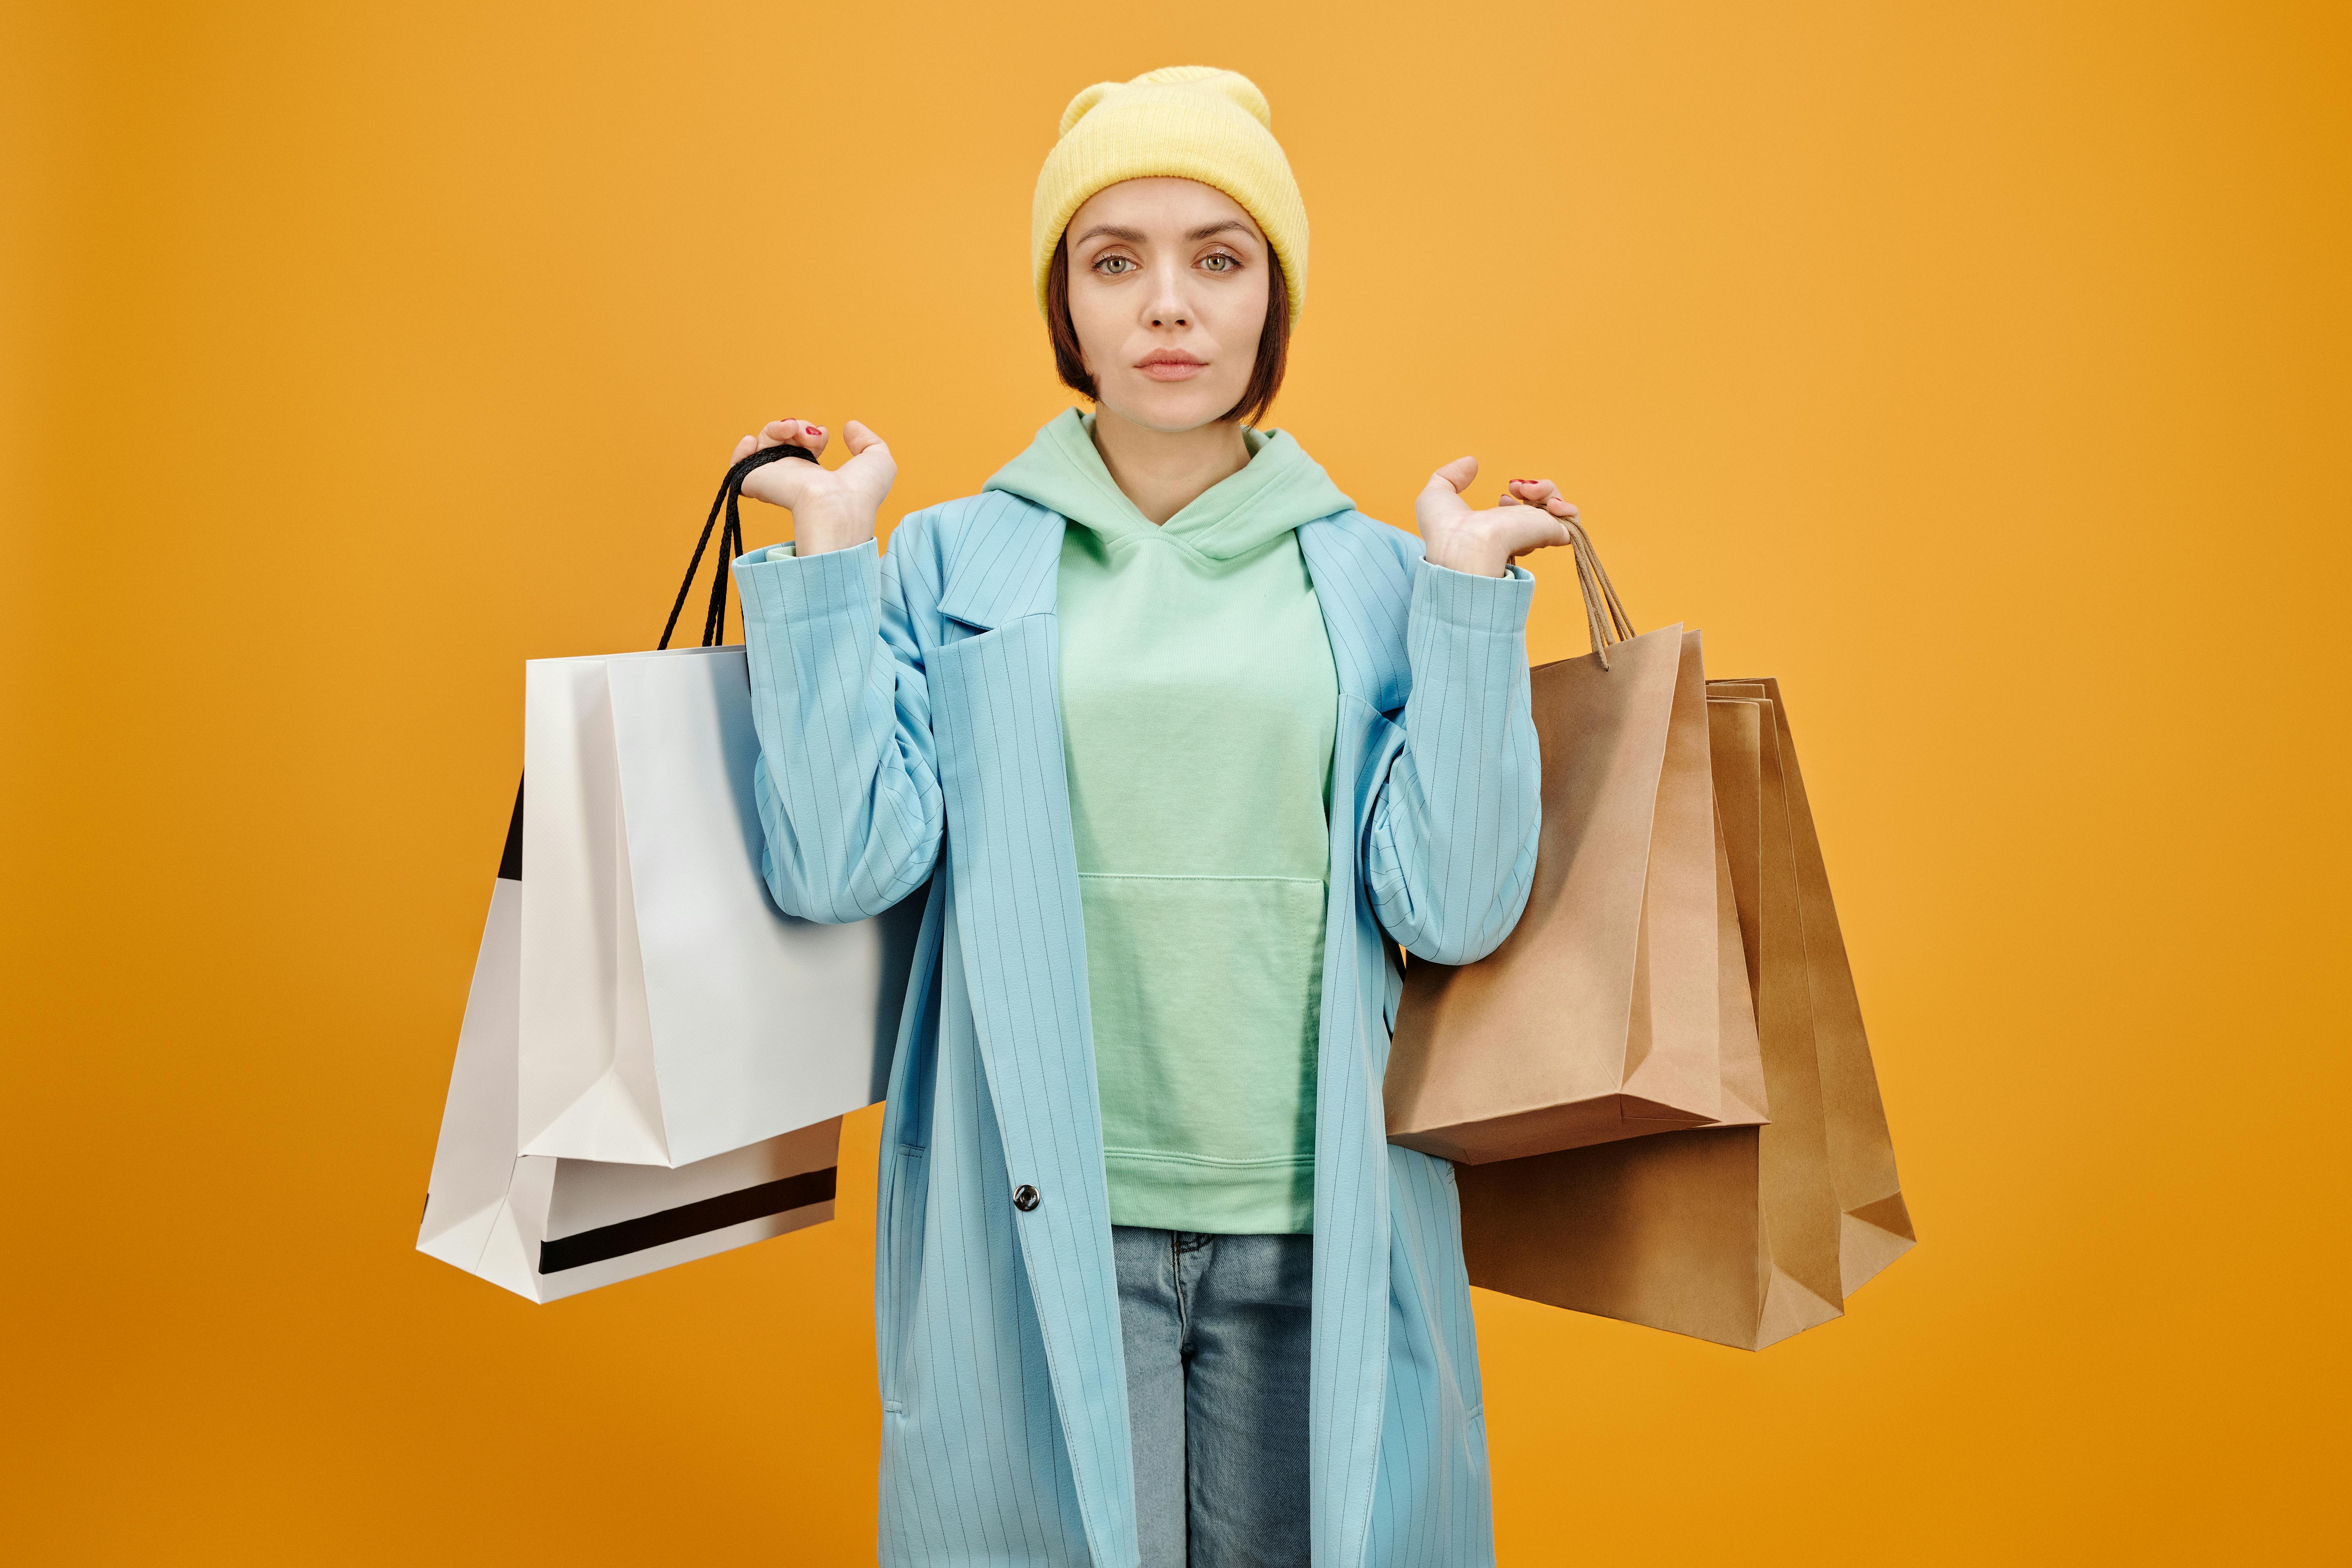 A woman holding shopping bags. | Source: Pexels